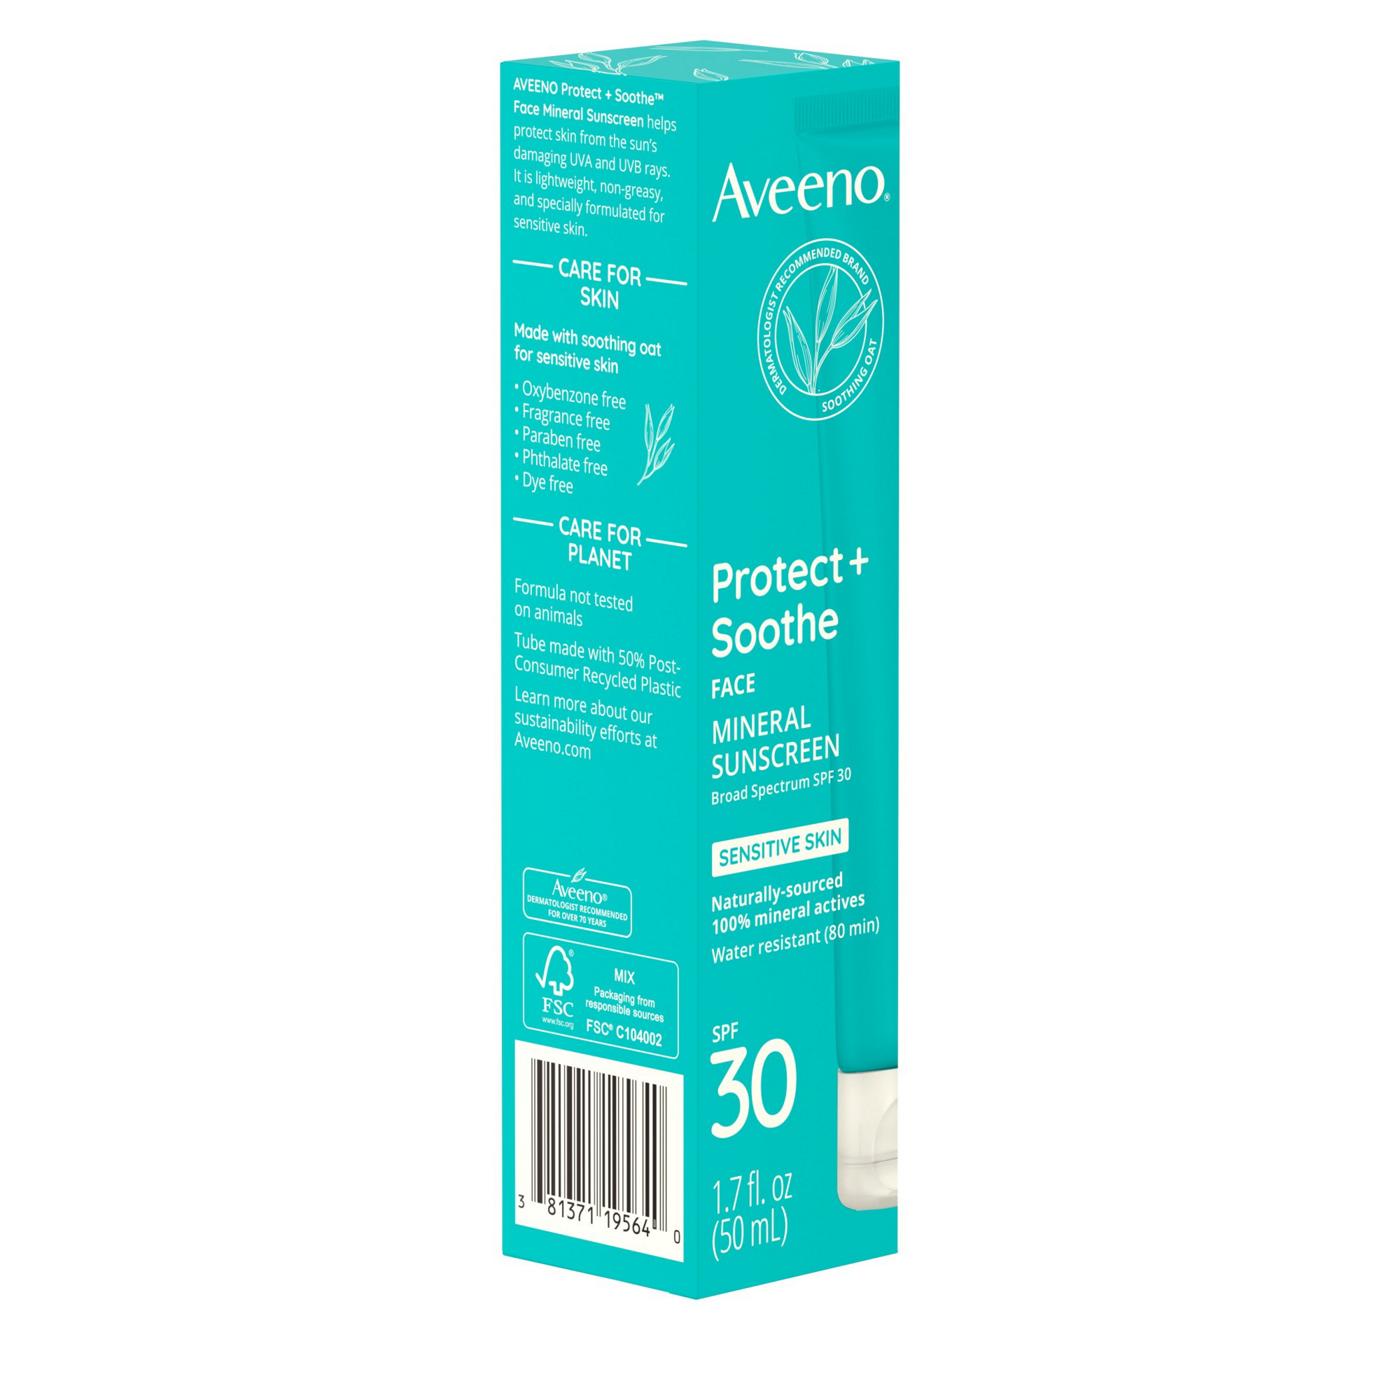 Aveeno Protect + Soothe Face Mineral Sunscreen SPF 30; image 6 of 9